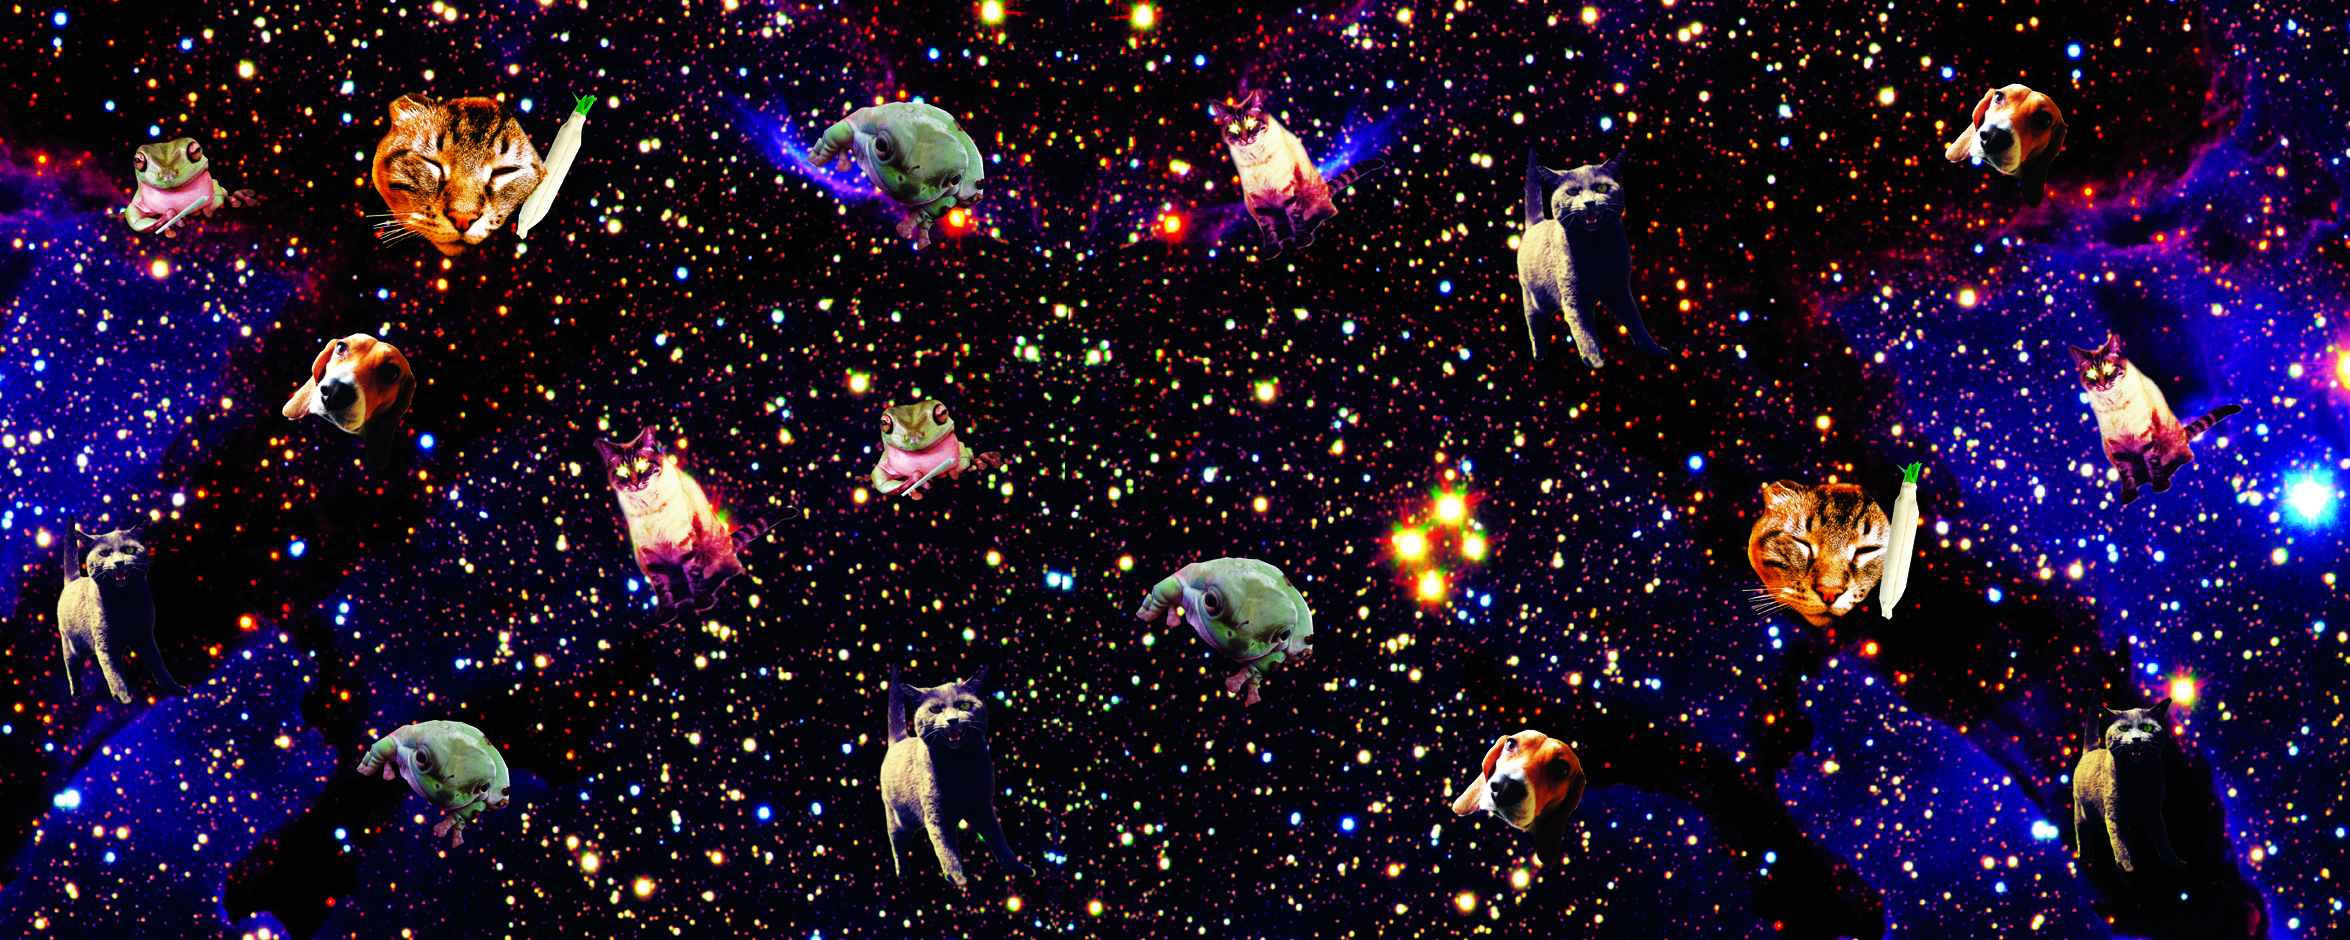 Kitty Babe In Space Cat Graphic Wallpaper Footprint